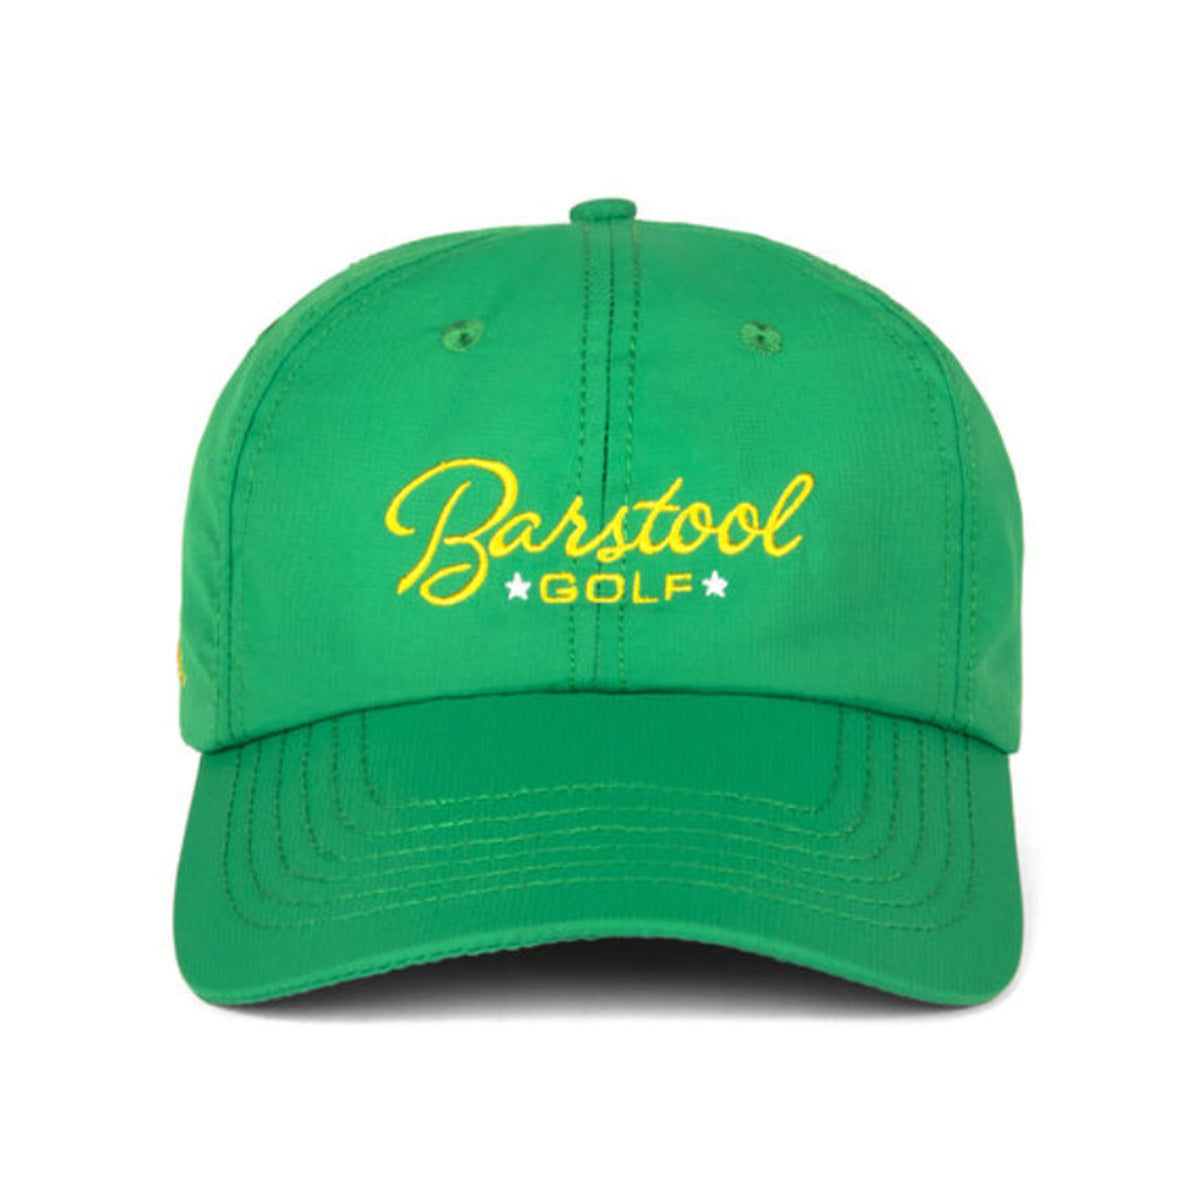 Barstool Golf Performance Hat - Fore Play Hats, Clothing & Merch